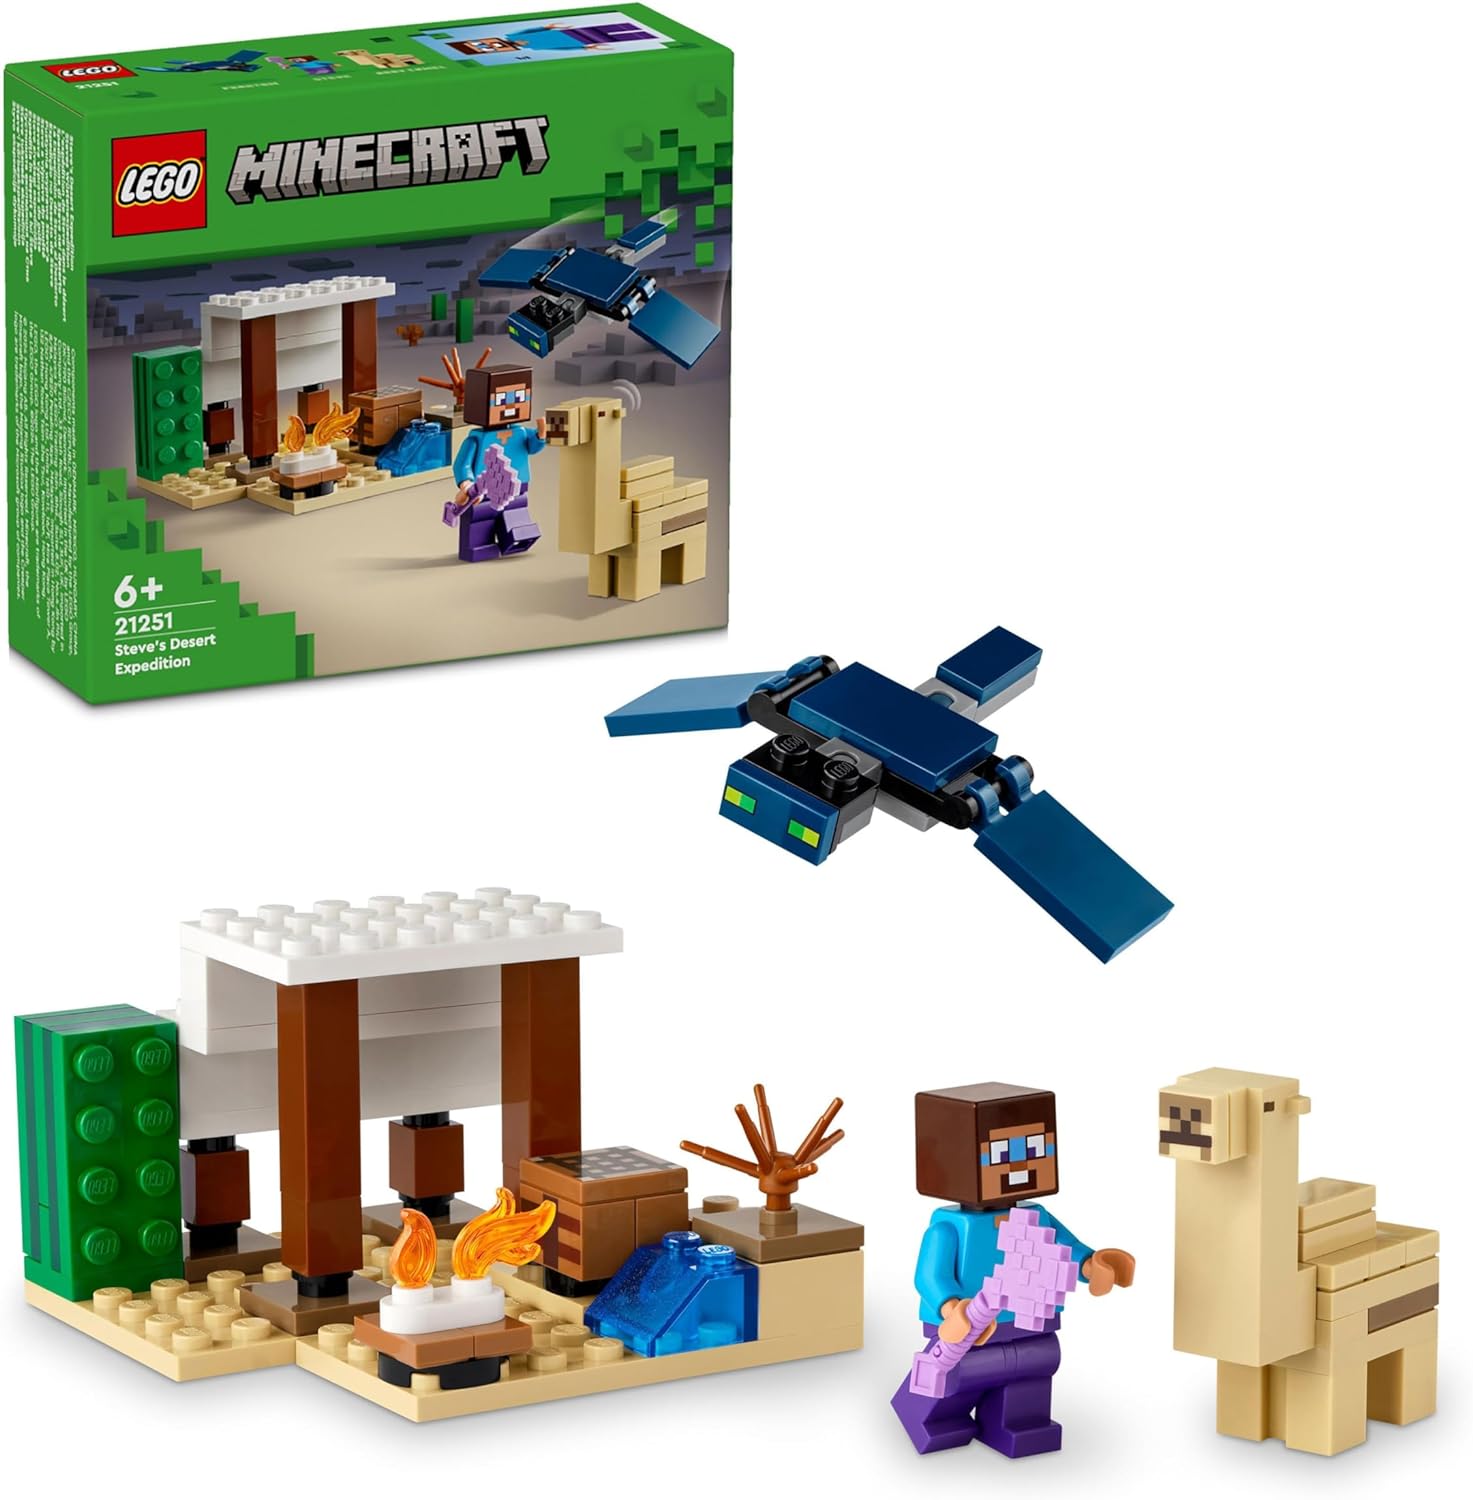 LEGO Minecraft Steves Desert Expedition Video Game Set for Boys and Girls, Biome with Steve, House, Figures and Camel Toy, Gamer Gift for Children from 6 Years 21251